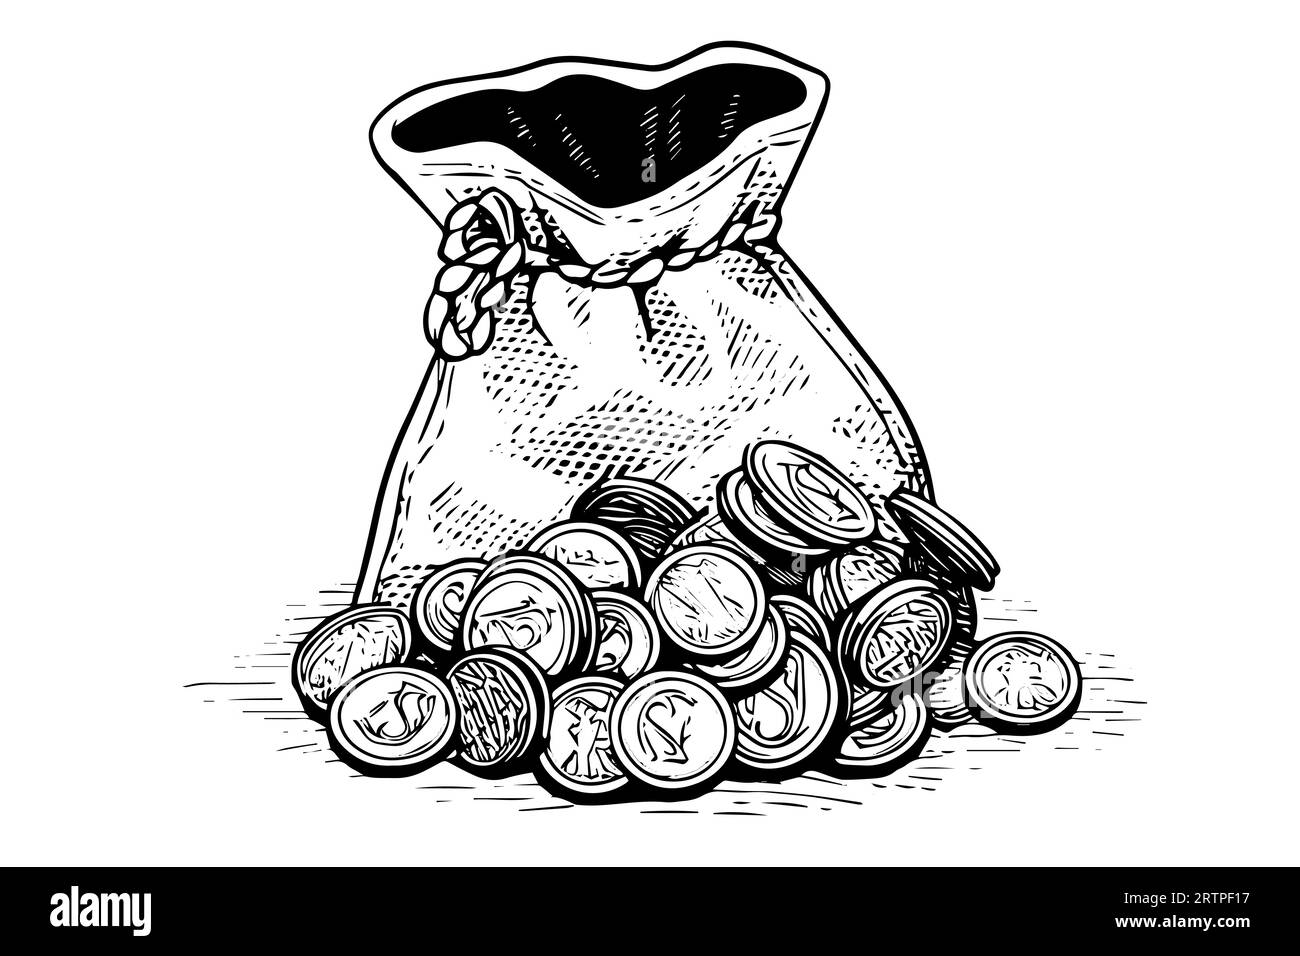 Vintage bag full of money coins hand drawn ink sketch. Engraving style ...